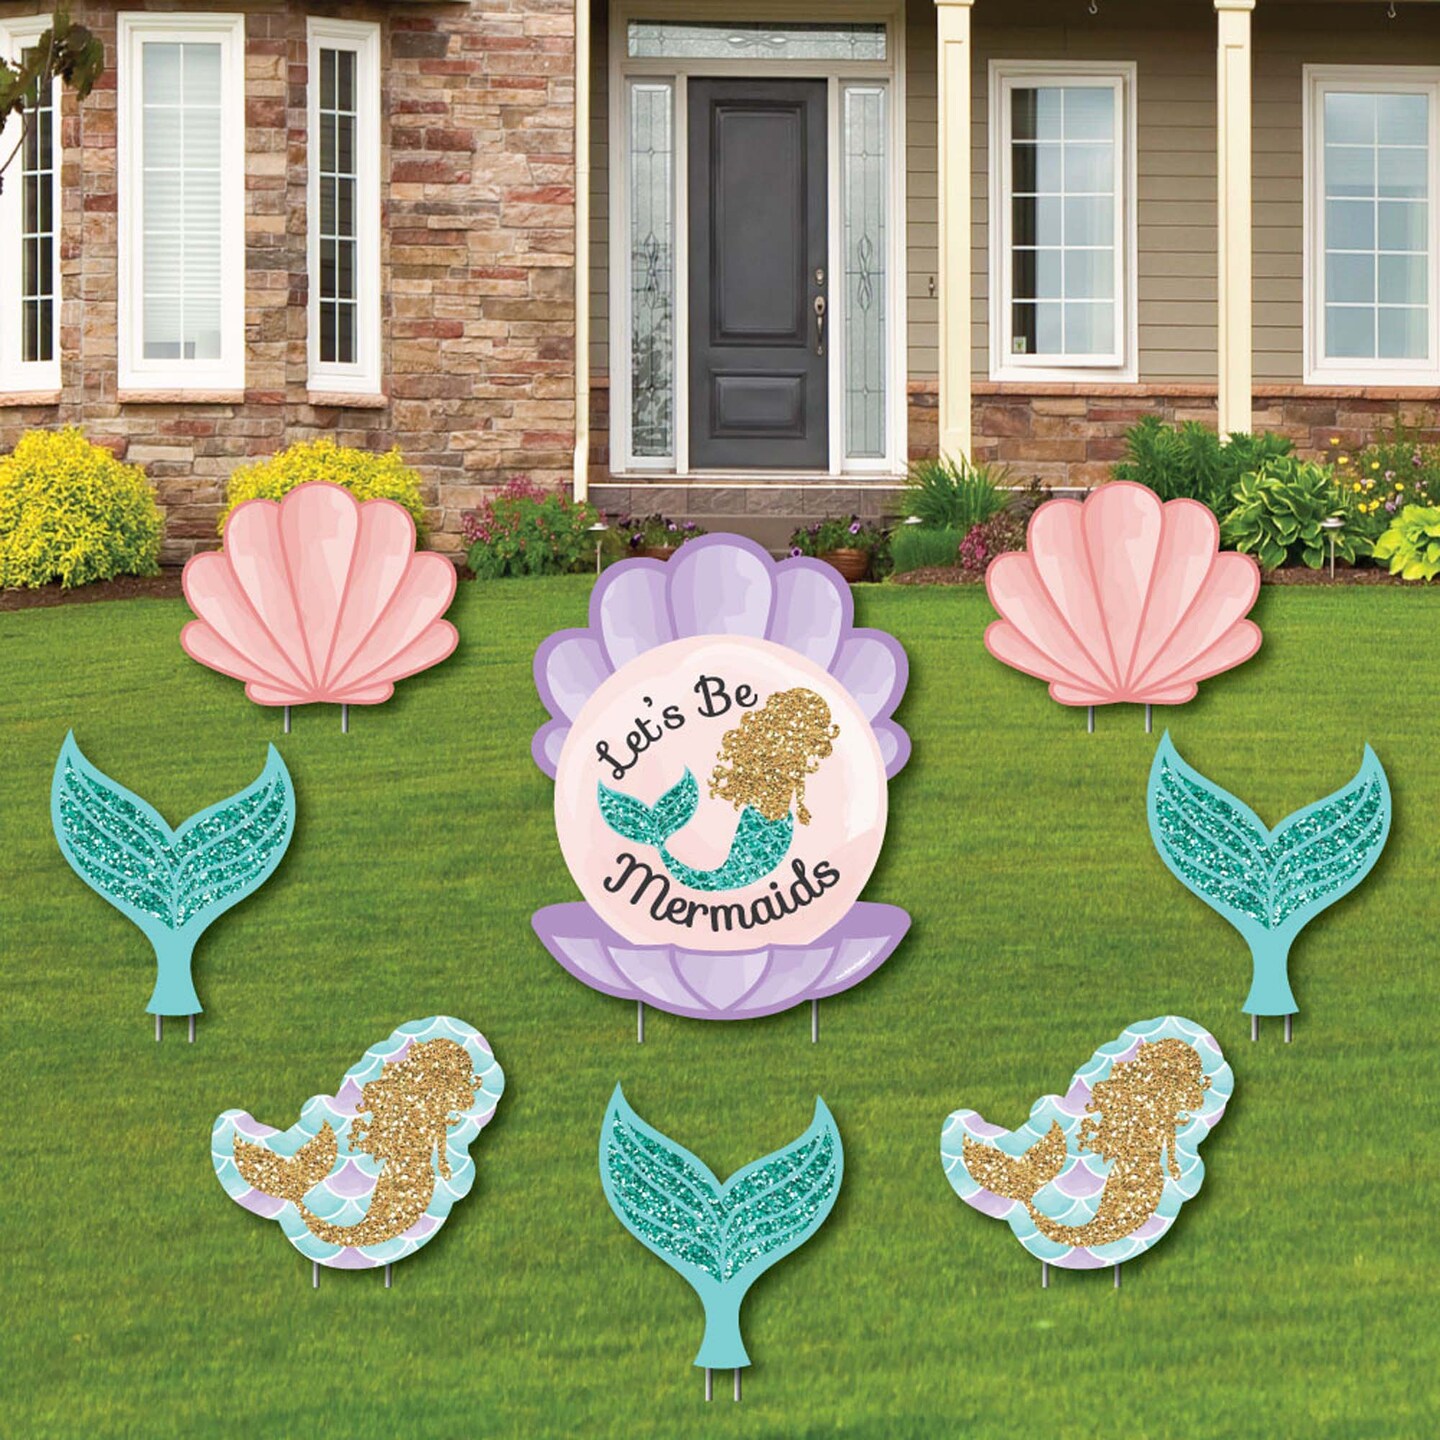 Big Dot of Happiness Let&#x27;s Be Mermaids - Yard Sign &#x26; Outdoor Lawn Decorations - Baby Shower or Birthday Party Yard Signs - Set of 8